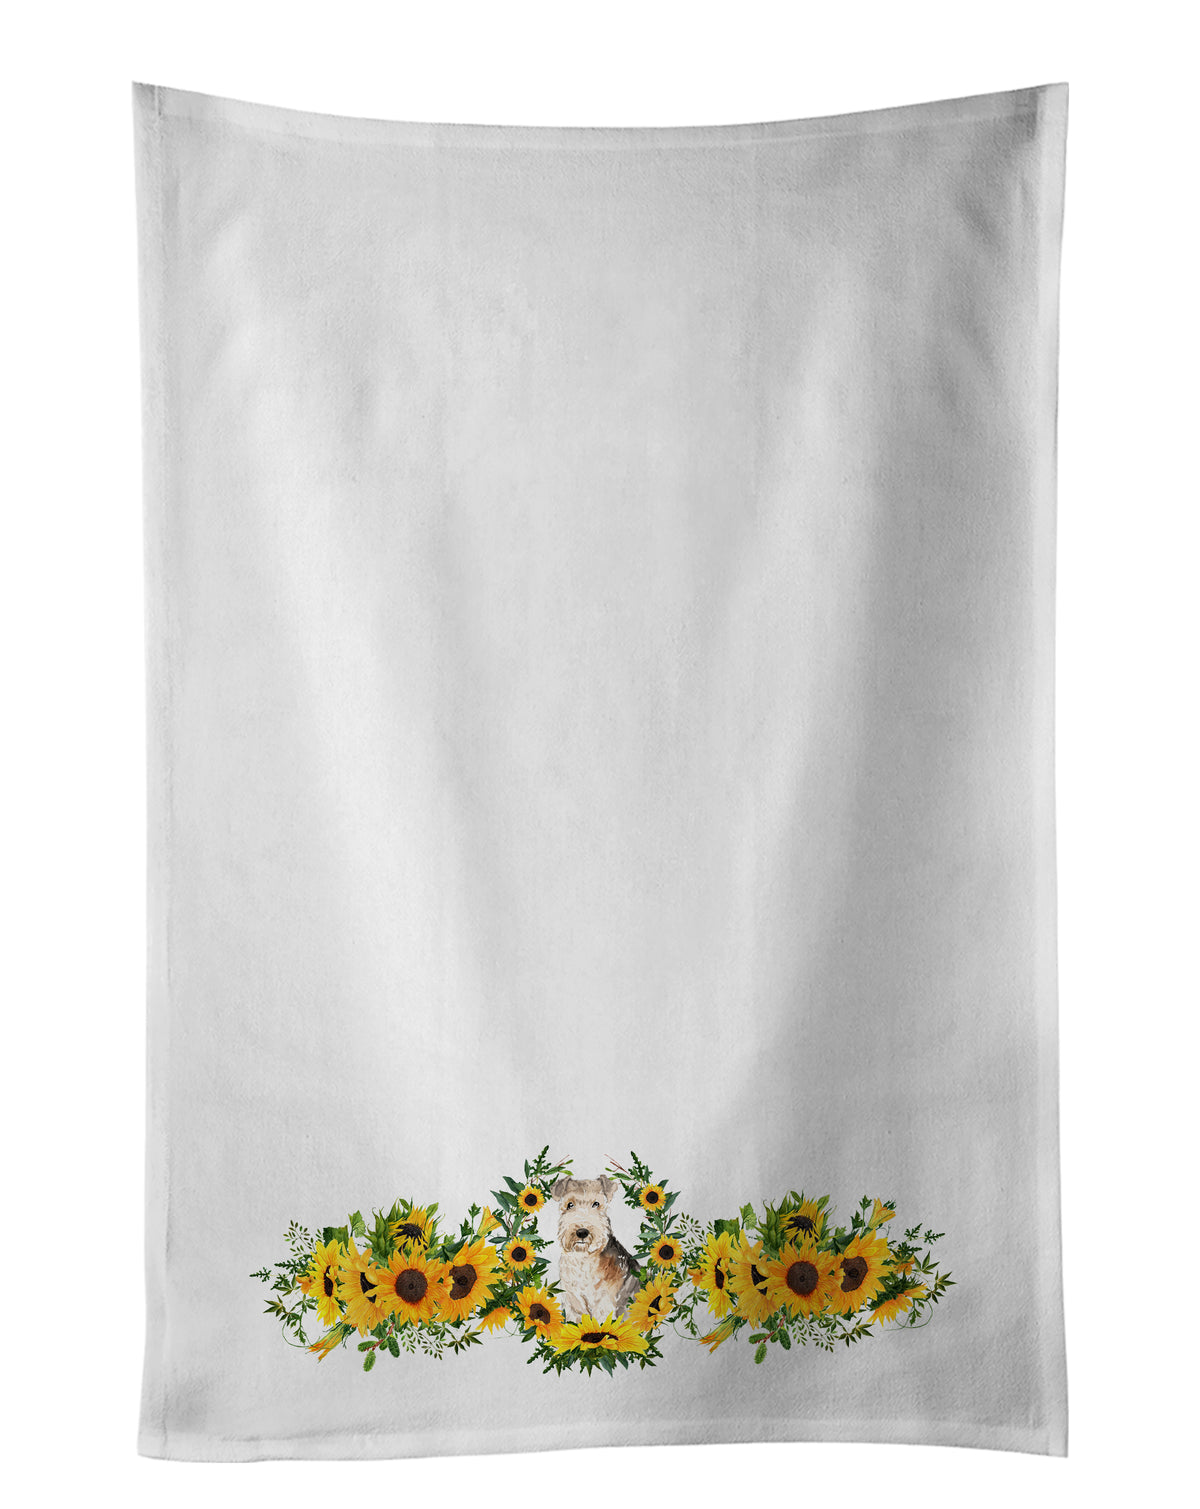 Buy this Lakeland Terrier in Sunflowers White Kitchen Towel Set of 2